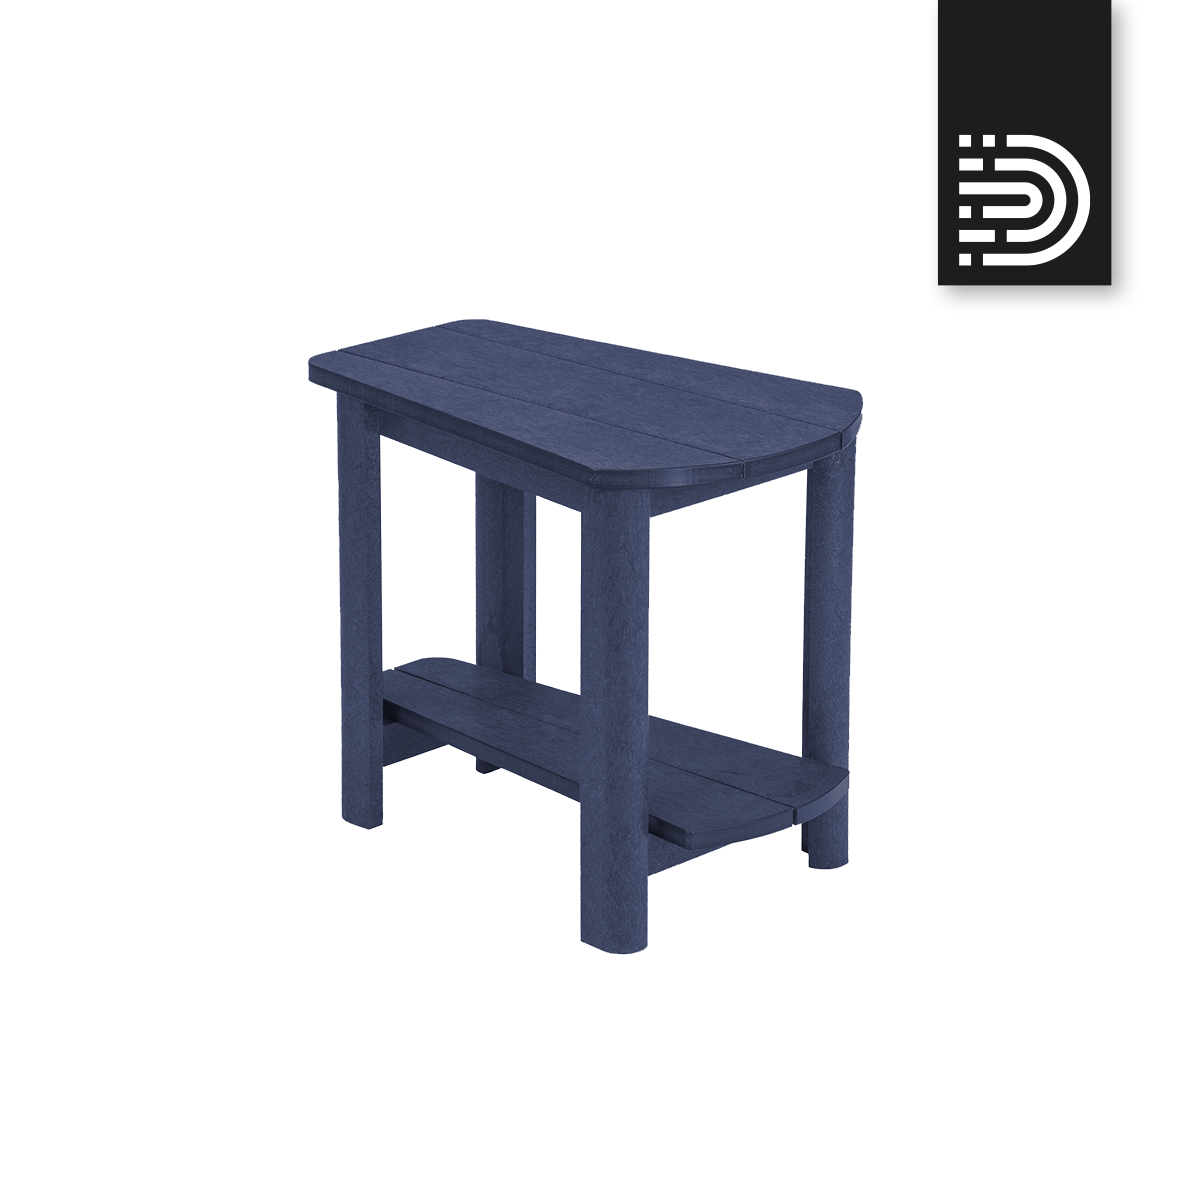 T04 Addy Side Table - Navy 20